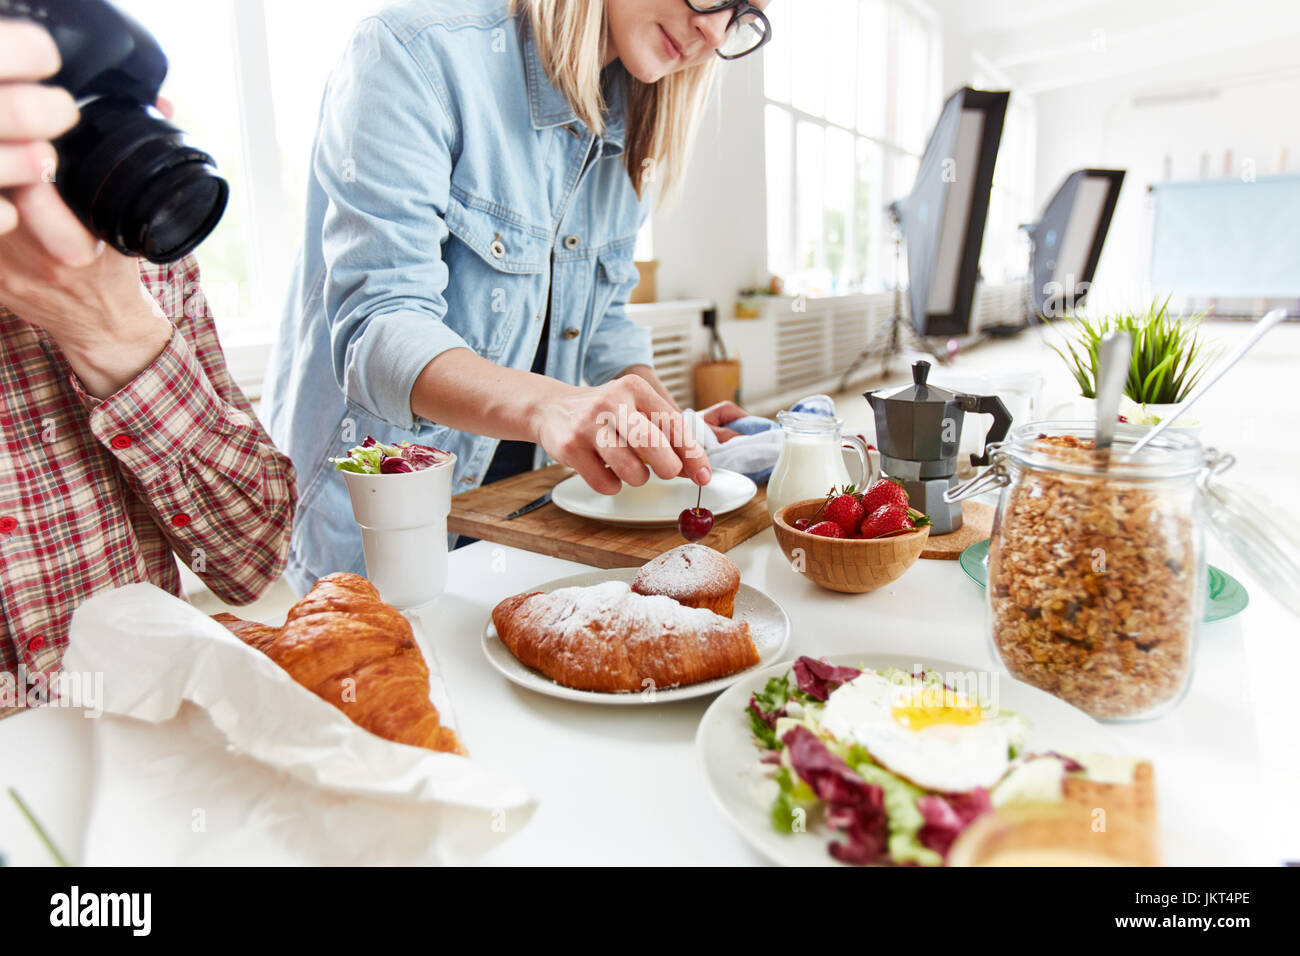 Food stylist preparing table with meals for photographing Stock Photo